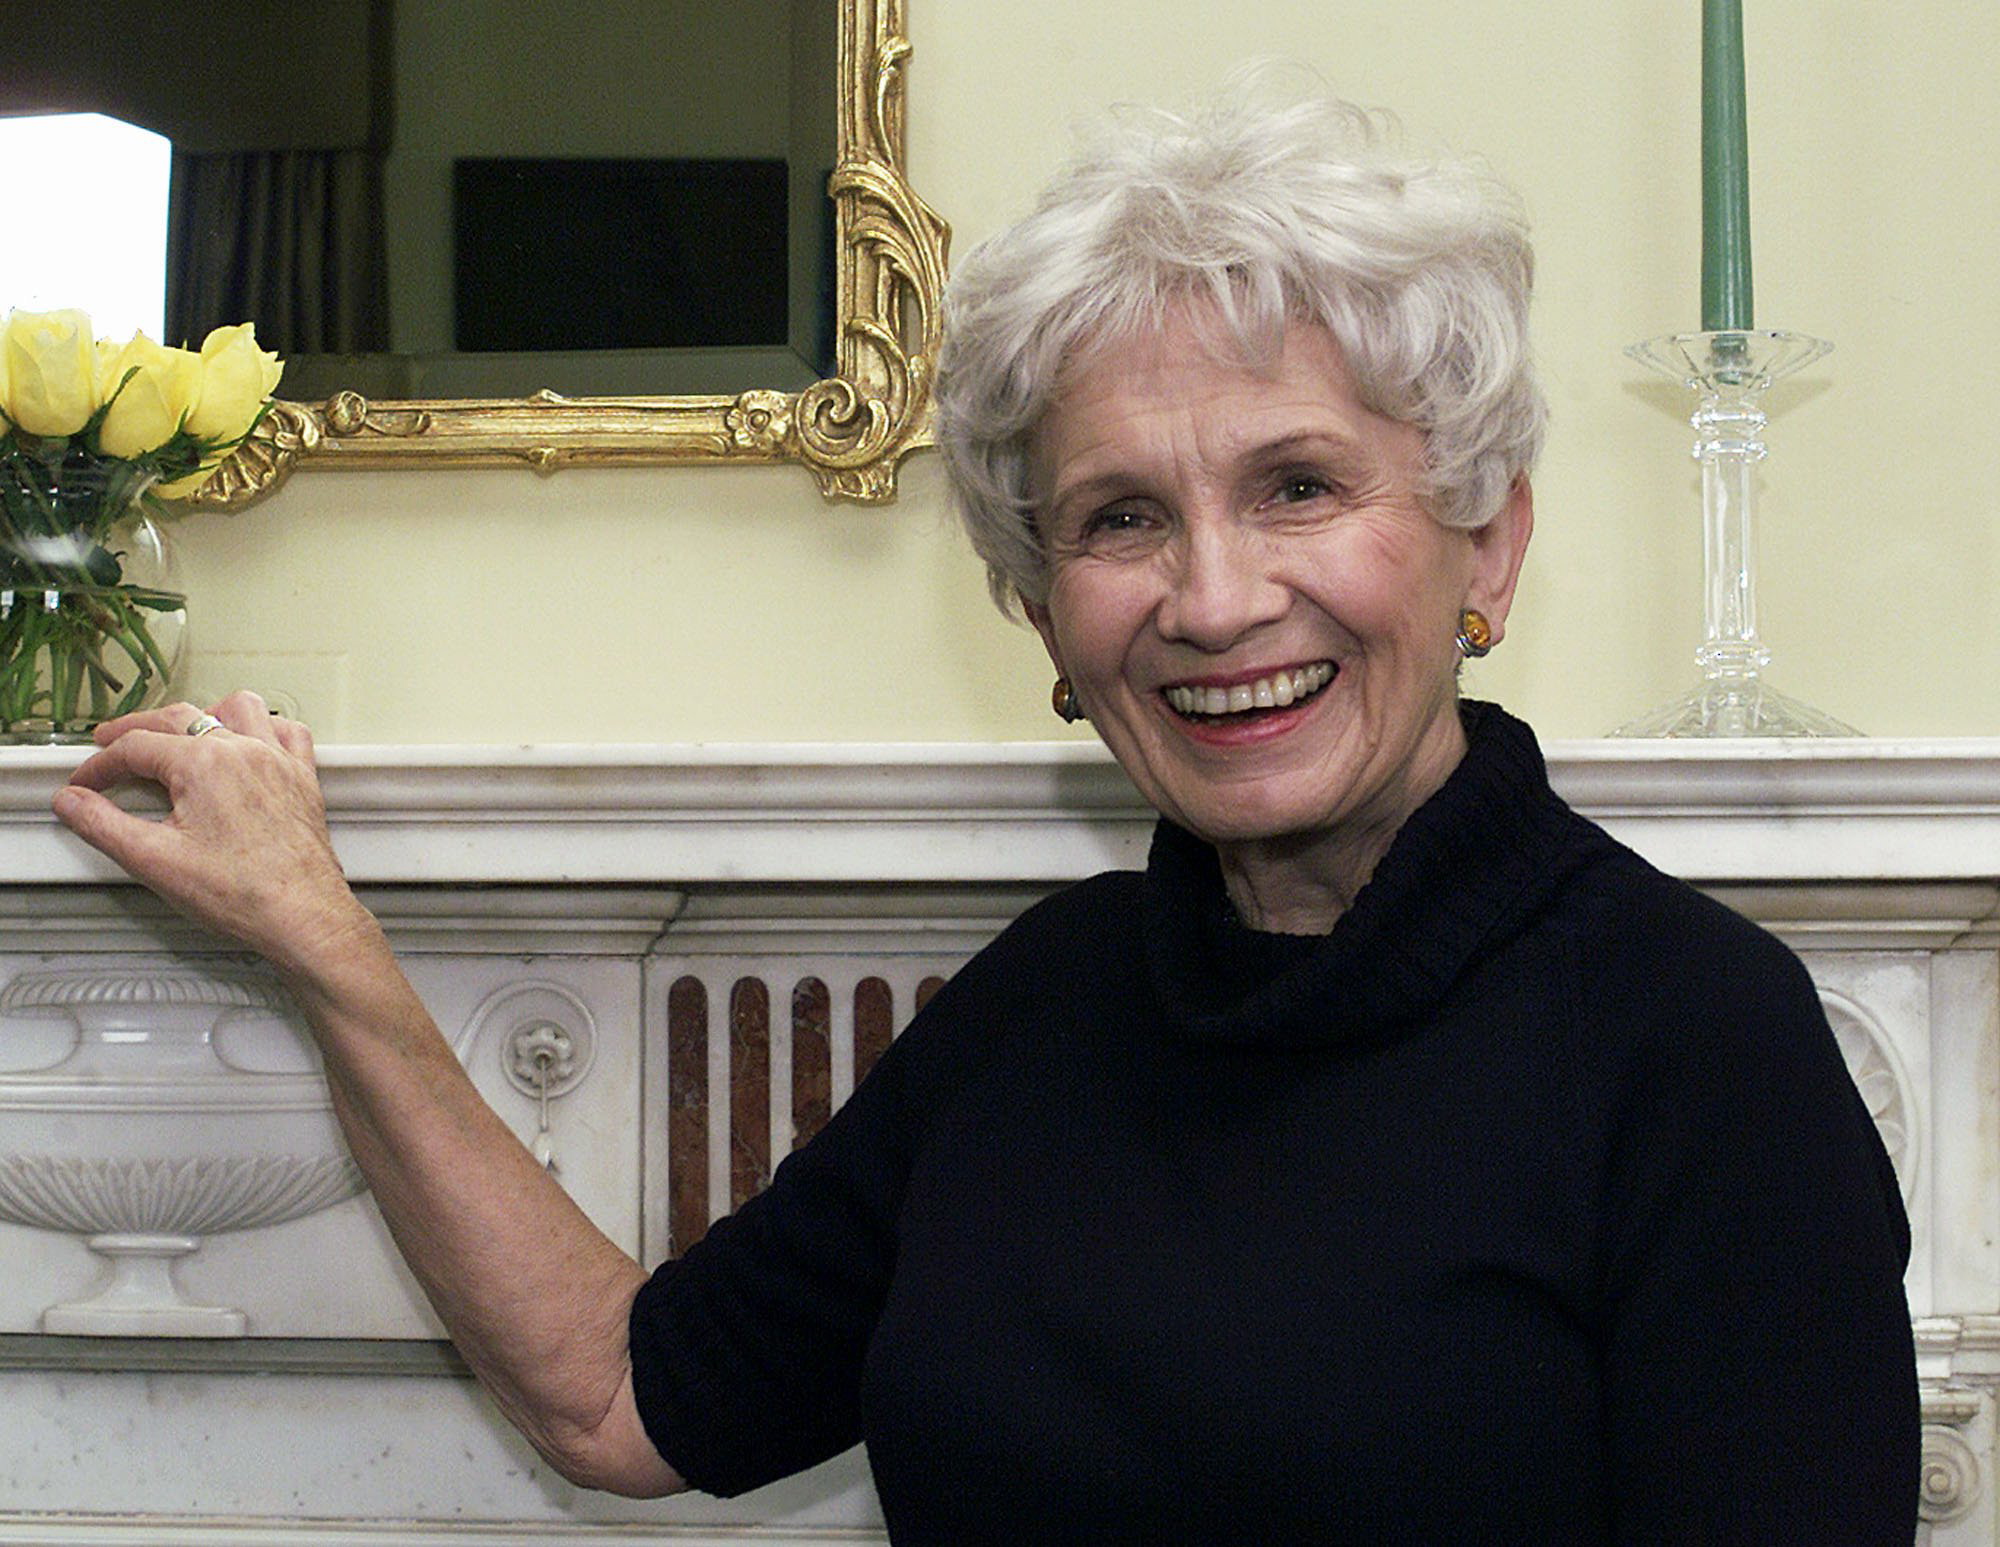 Canadian author Alice Munro poses for a photograph at the Canadian Consulate's residence in New York in 2002.